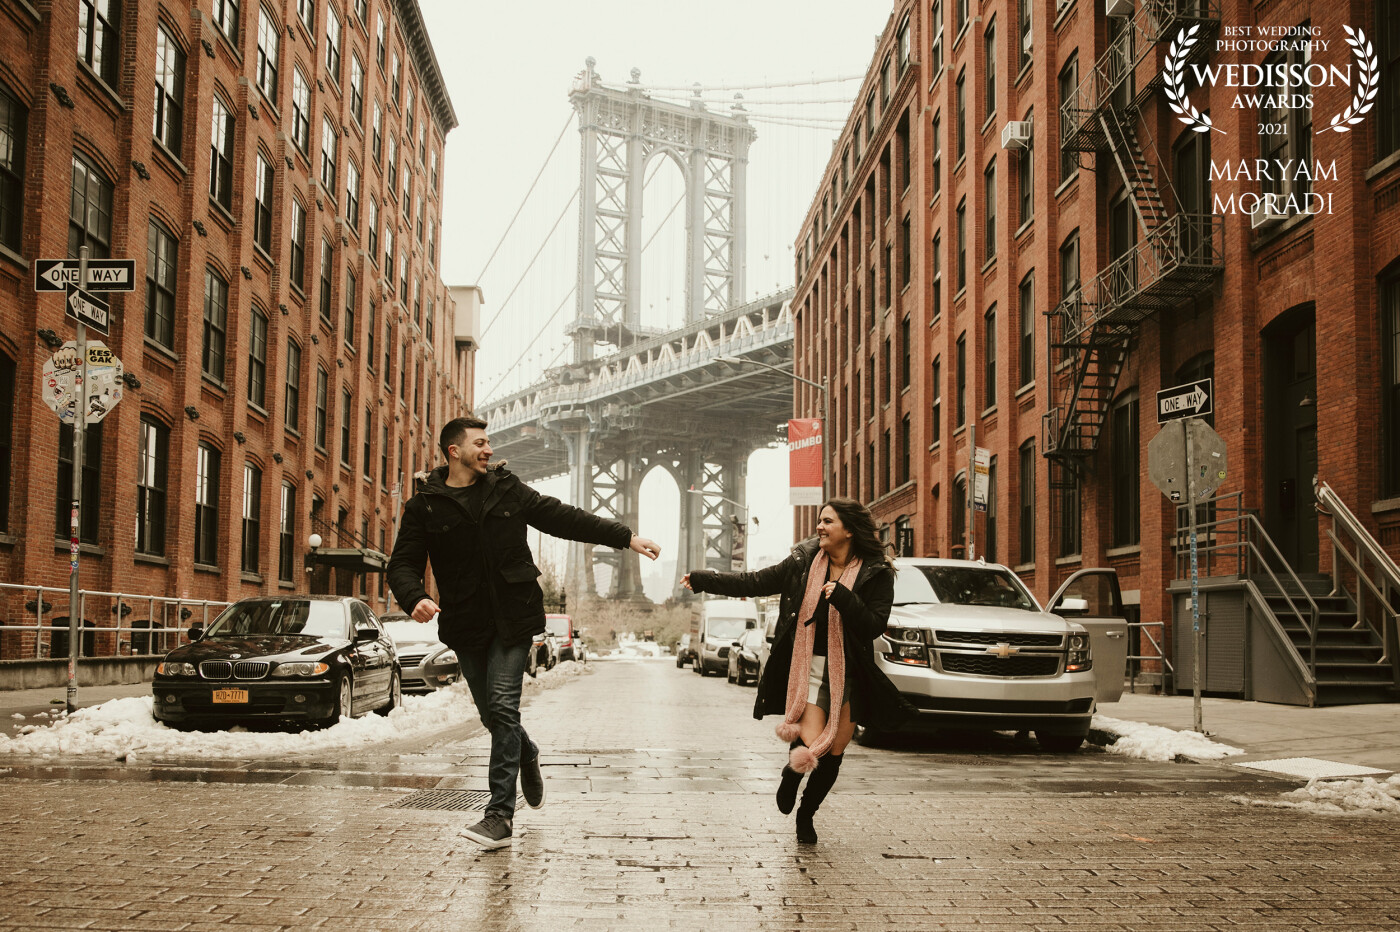 Dumbo and it’s surrounding are always my favorite spots for engagement sessions, The energy of this location allows you to express what you have within.<br />
<br />
Here, In this iconic spot I asked Emily and Zack to run in the middle of street and show their joyful moments and love. The image came out in a way that I was expected.<br />
@marymor_photography<br />
New York City, US